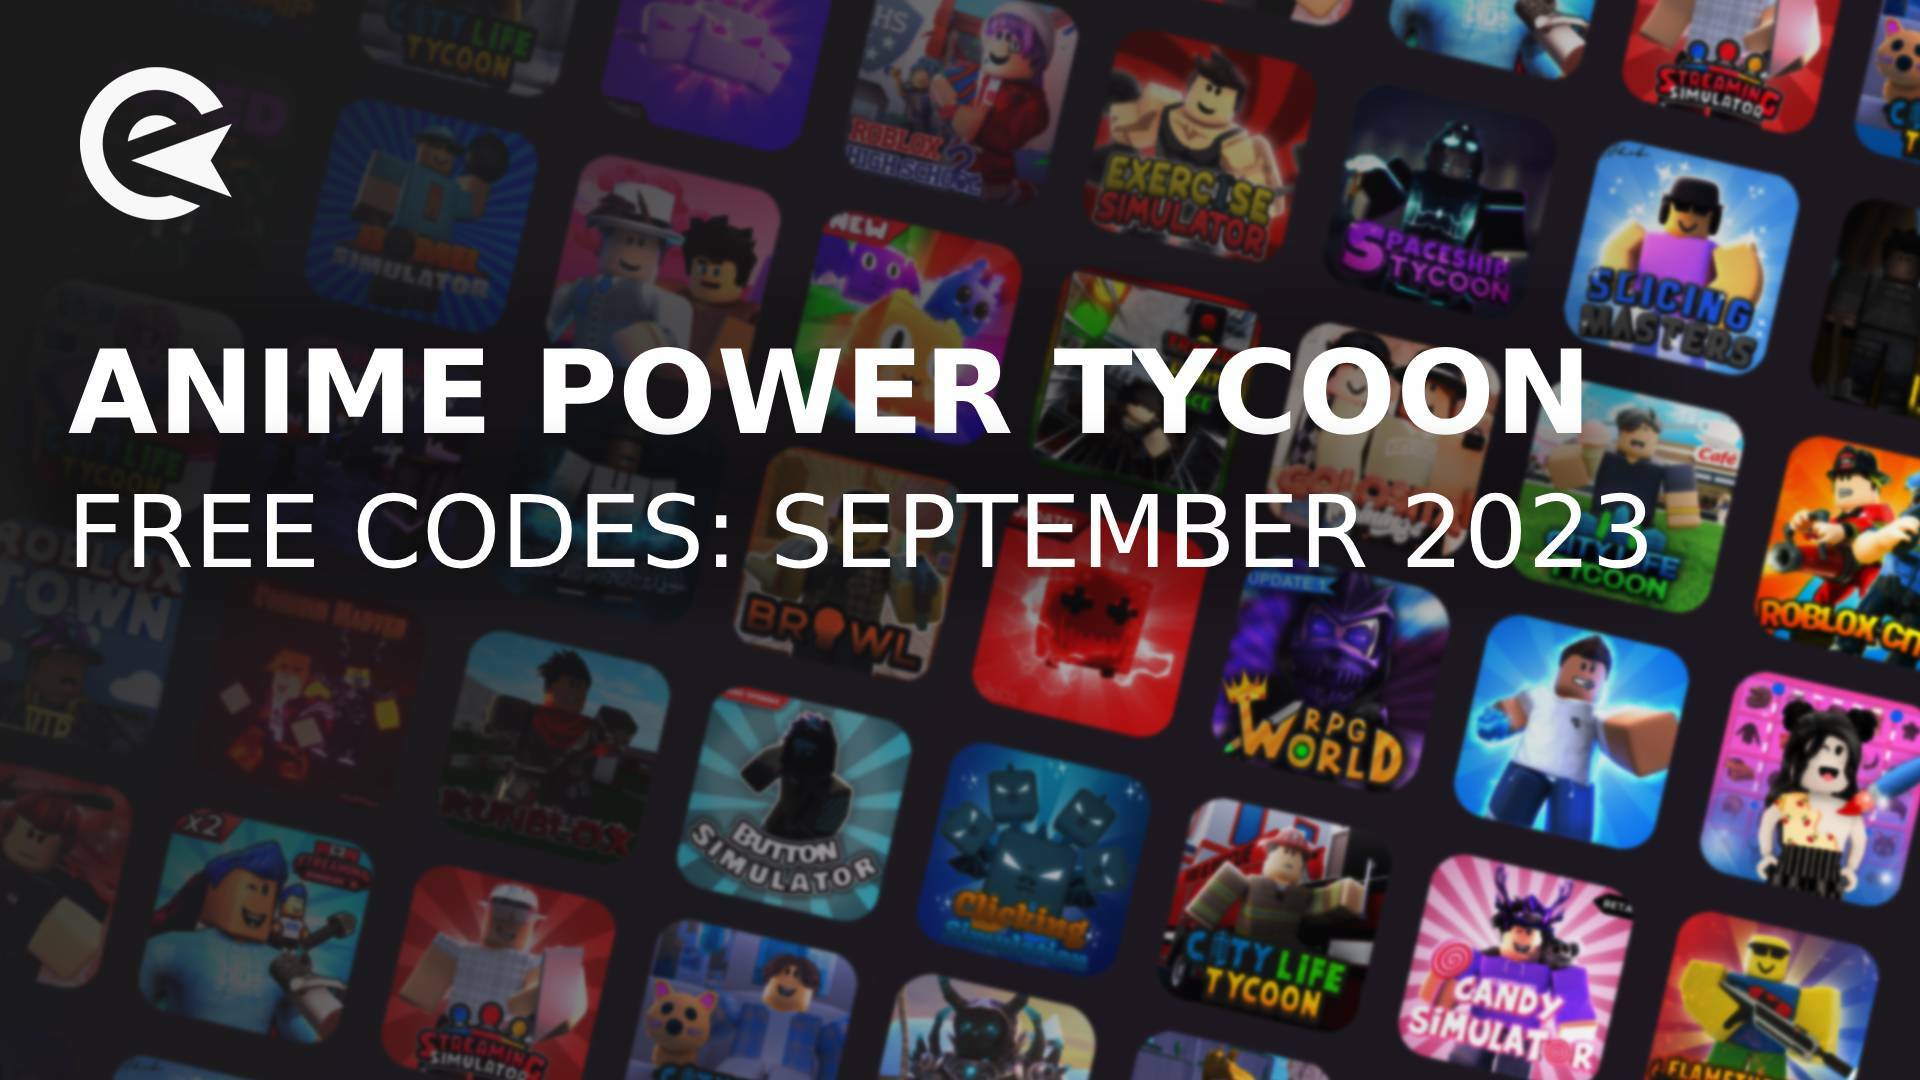 Anime Power Tycoon Codes For October 2023 - Roblox